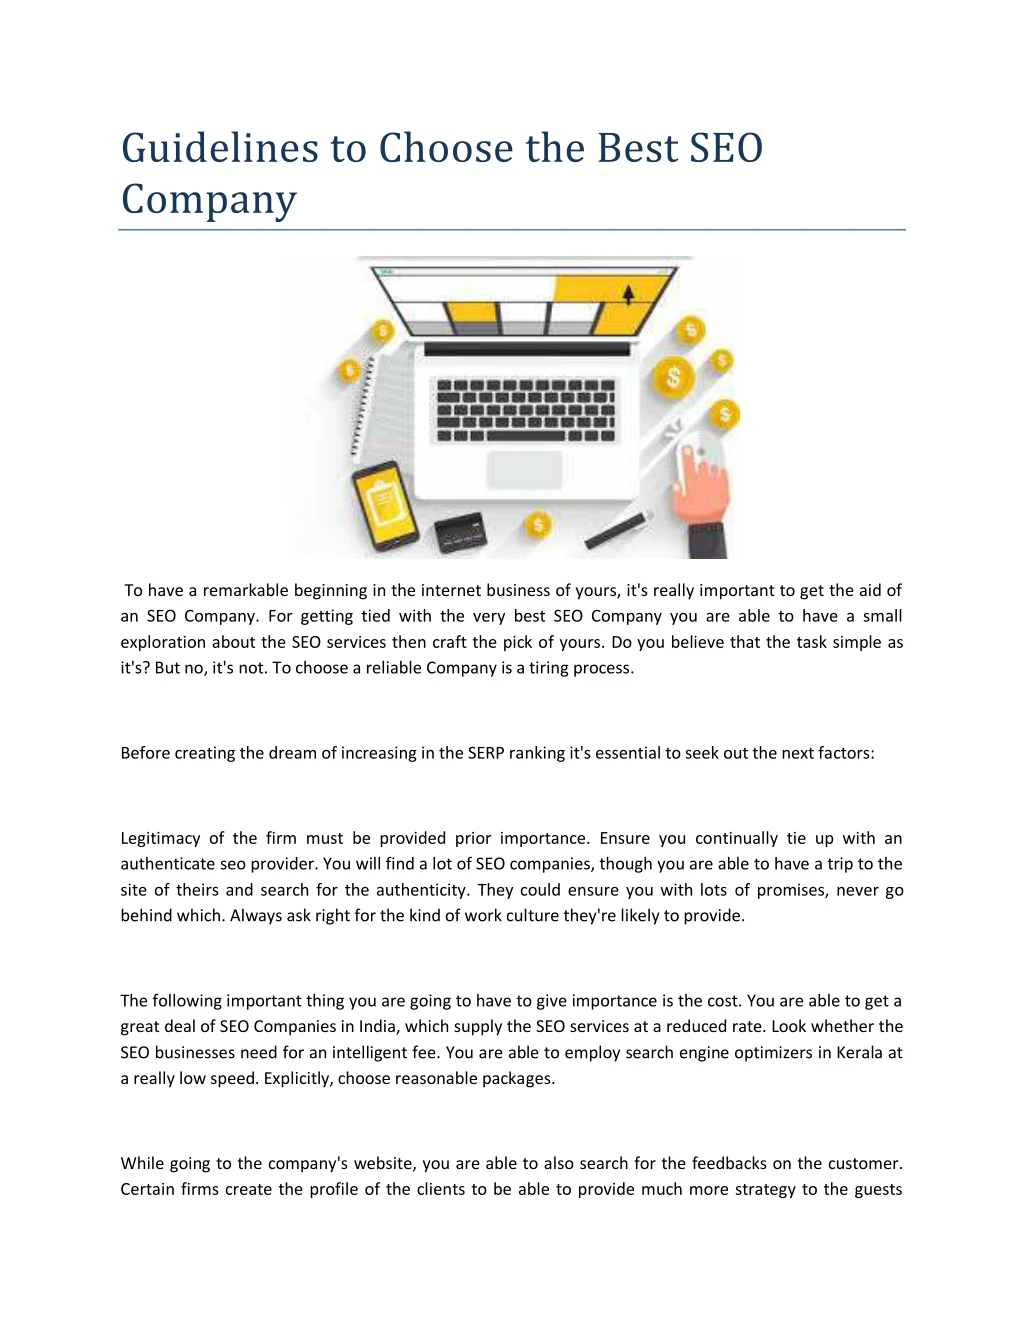 guidelines to choose the best seo company